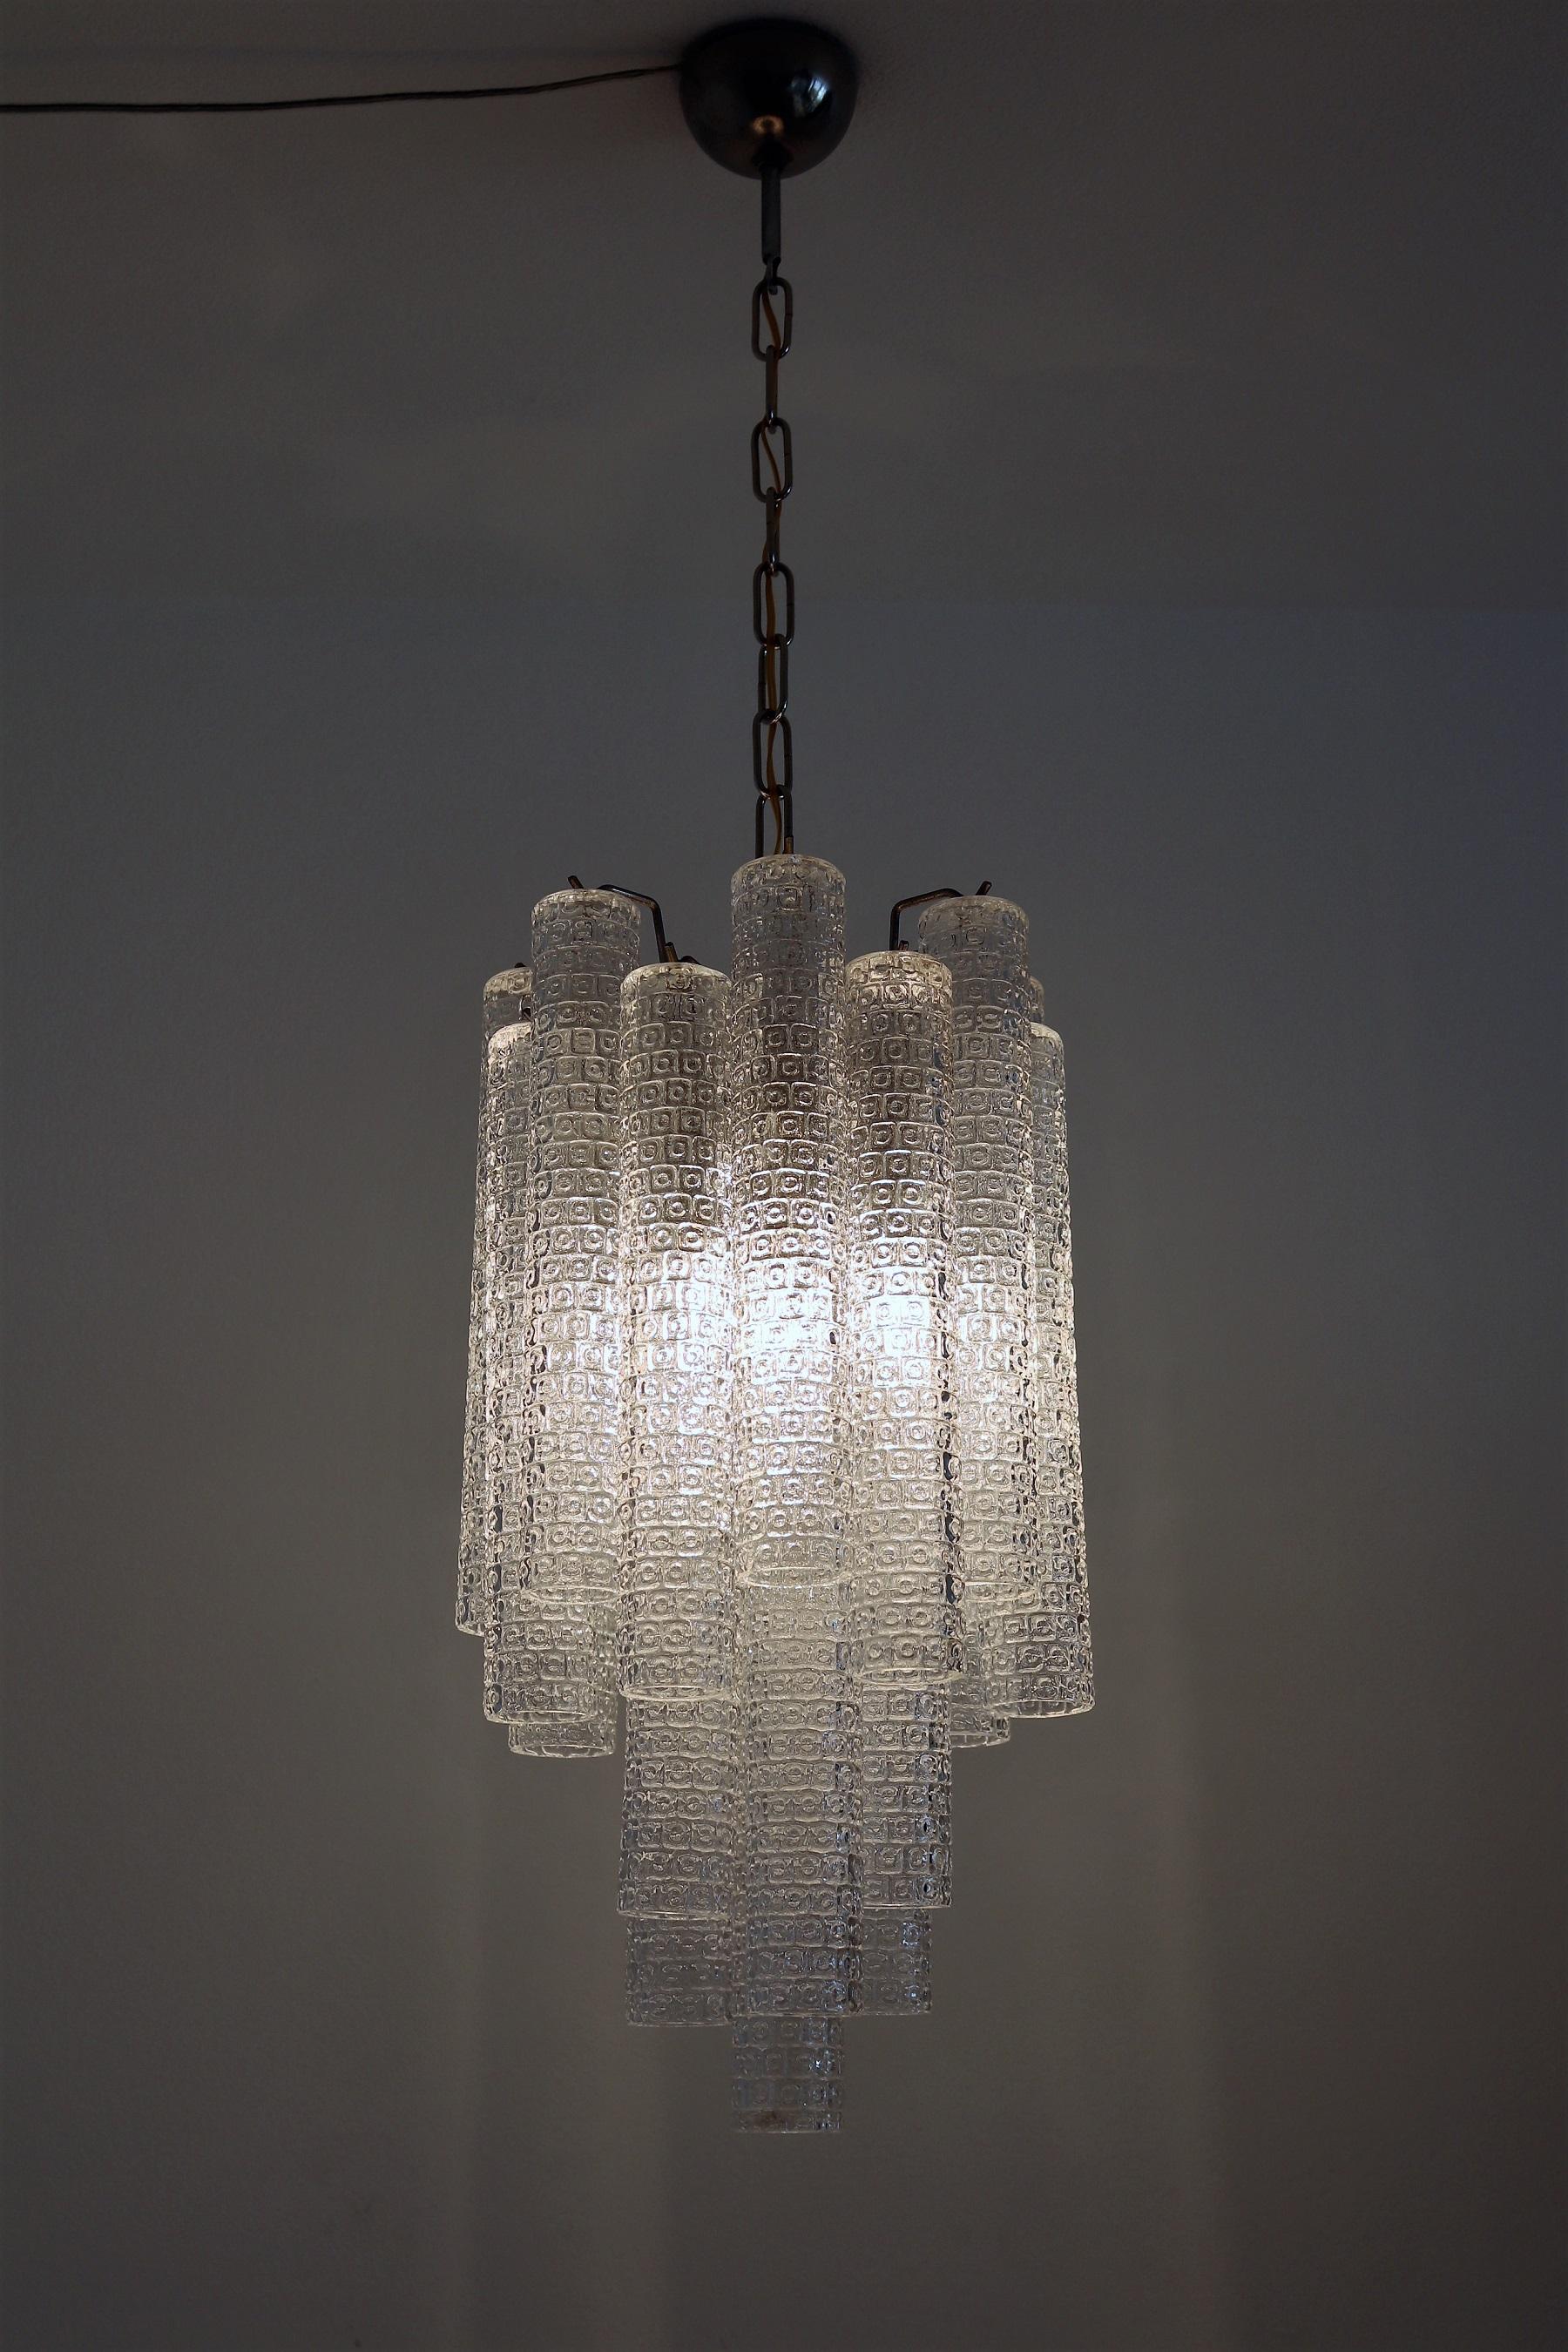 Italian Midcentury Murano Glass Crystal Tube Chandelier by Venini, 1950s For Sale 6